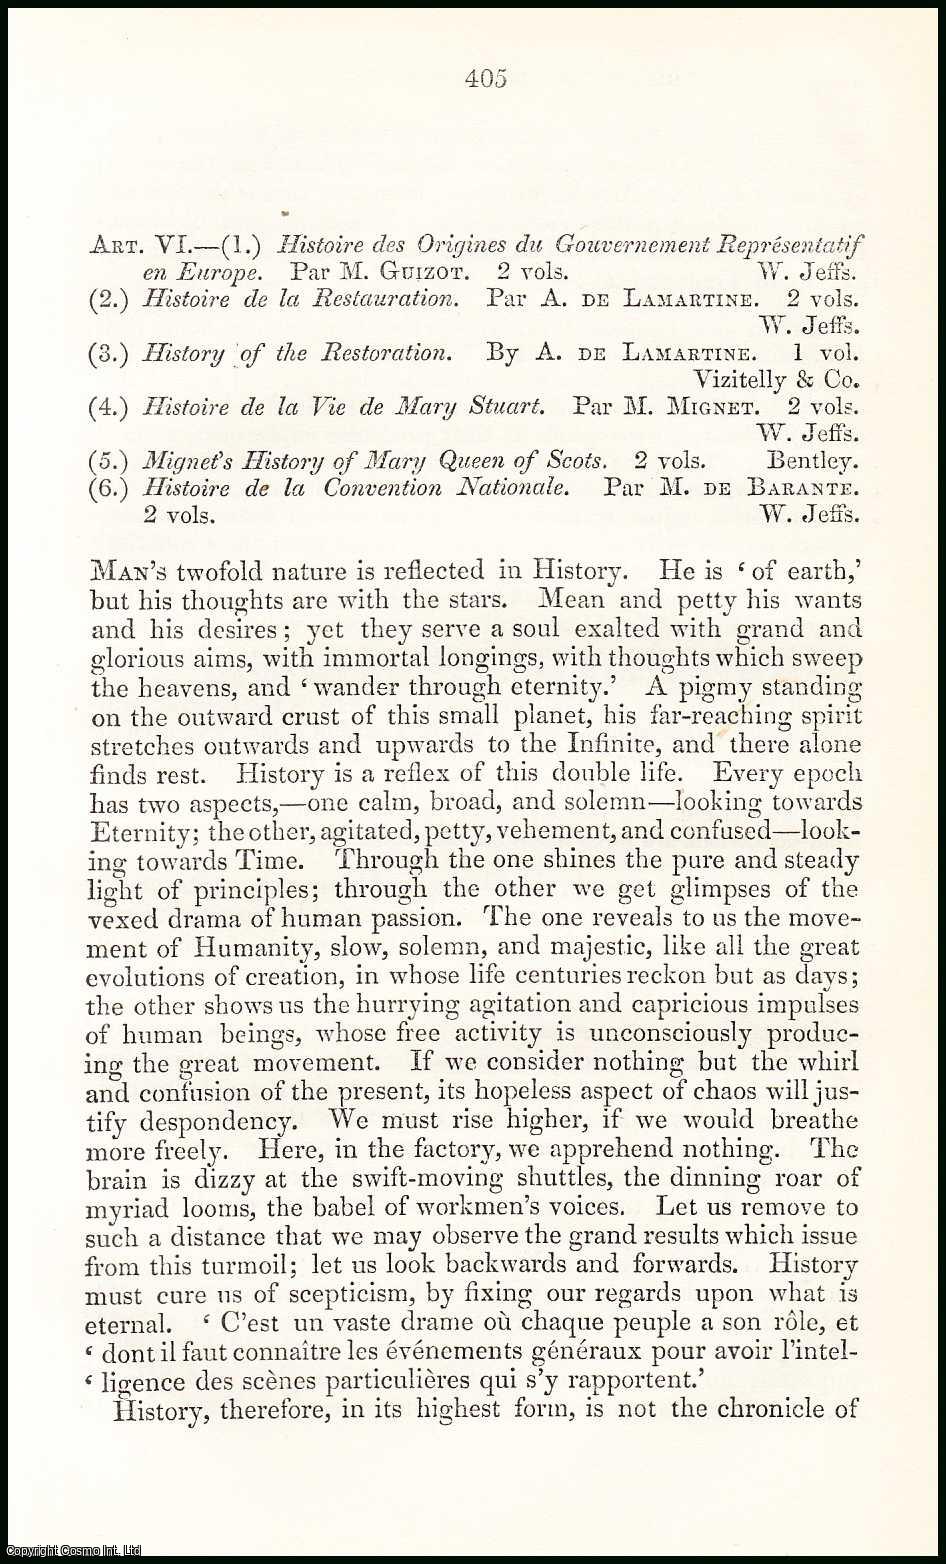 G. H. Lewes - History by Modern Frenchmen : Napoleon ; What is History ; Study of History ; the Moral Law & more. A rare original article from the British Quarterly Review, 1851.